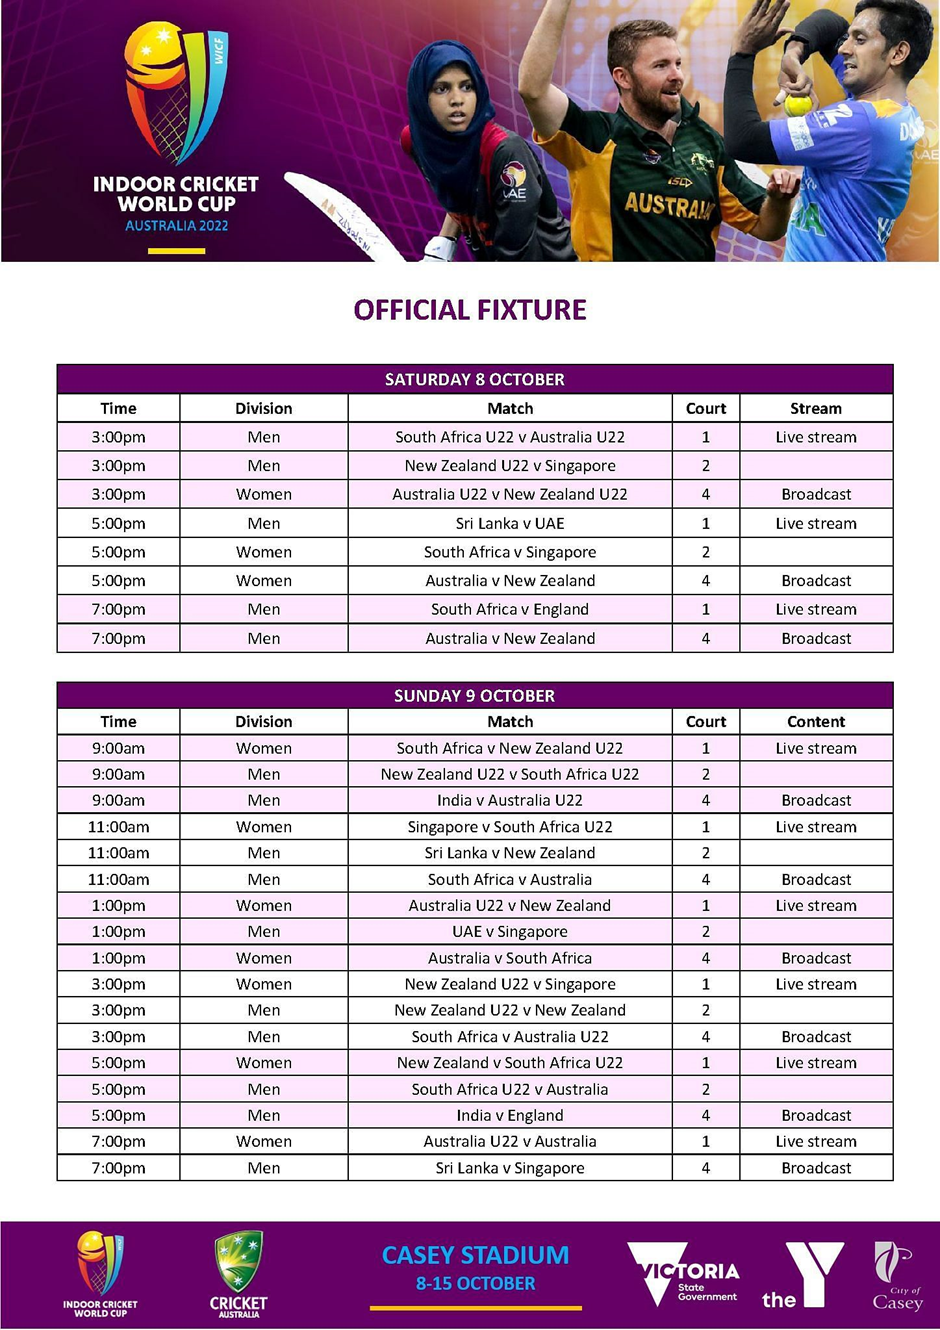 Indoor Cricket News 2022 World Cup Fixtures Released, Teams and Format Confirmed, 43 Matches to be Broadcast Live